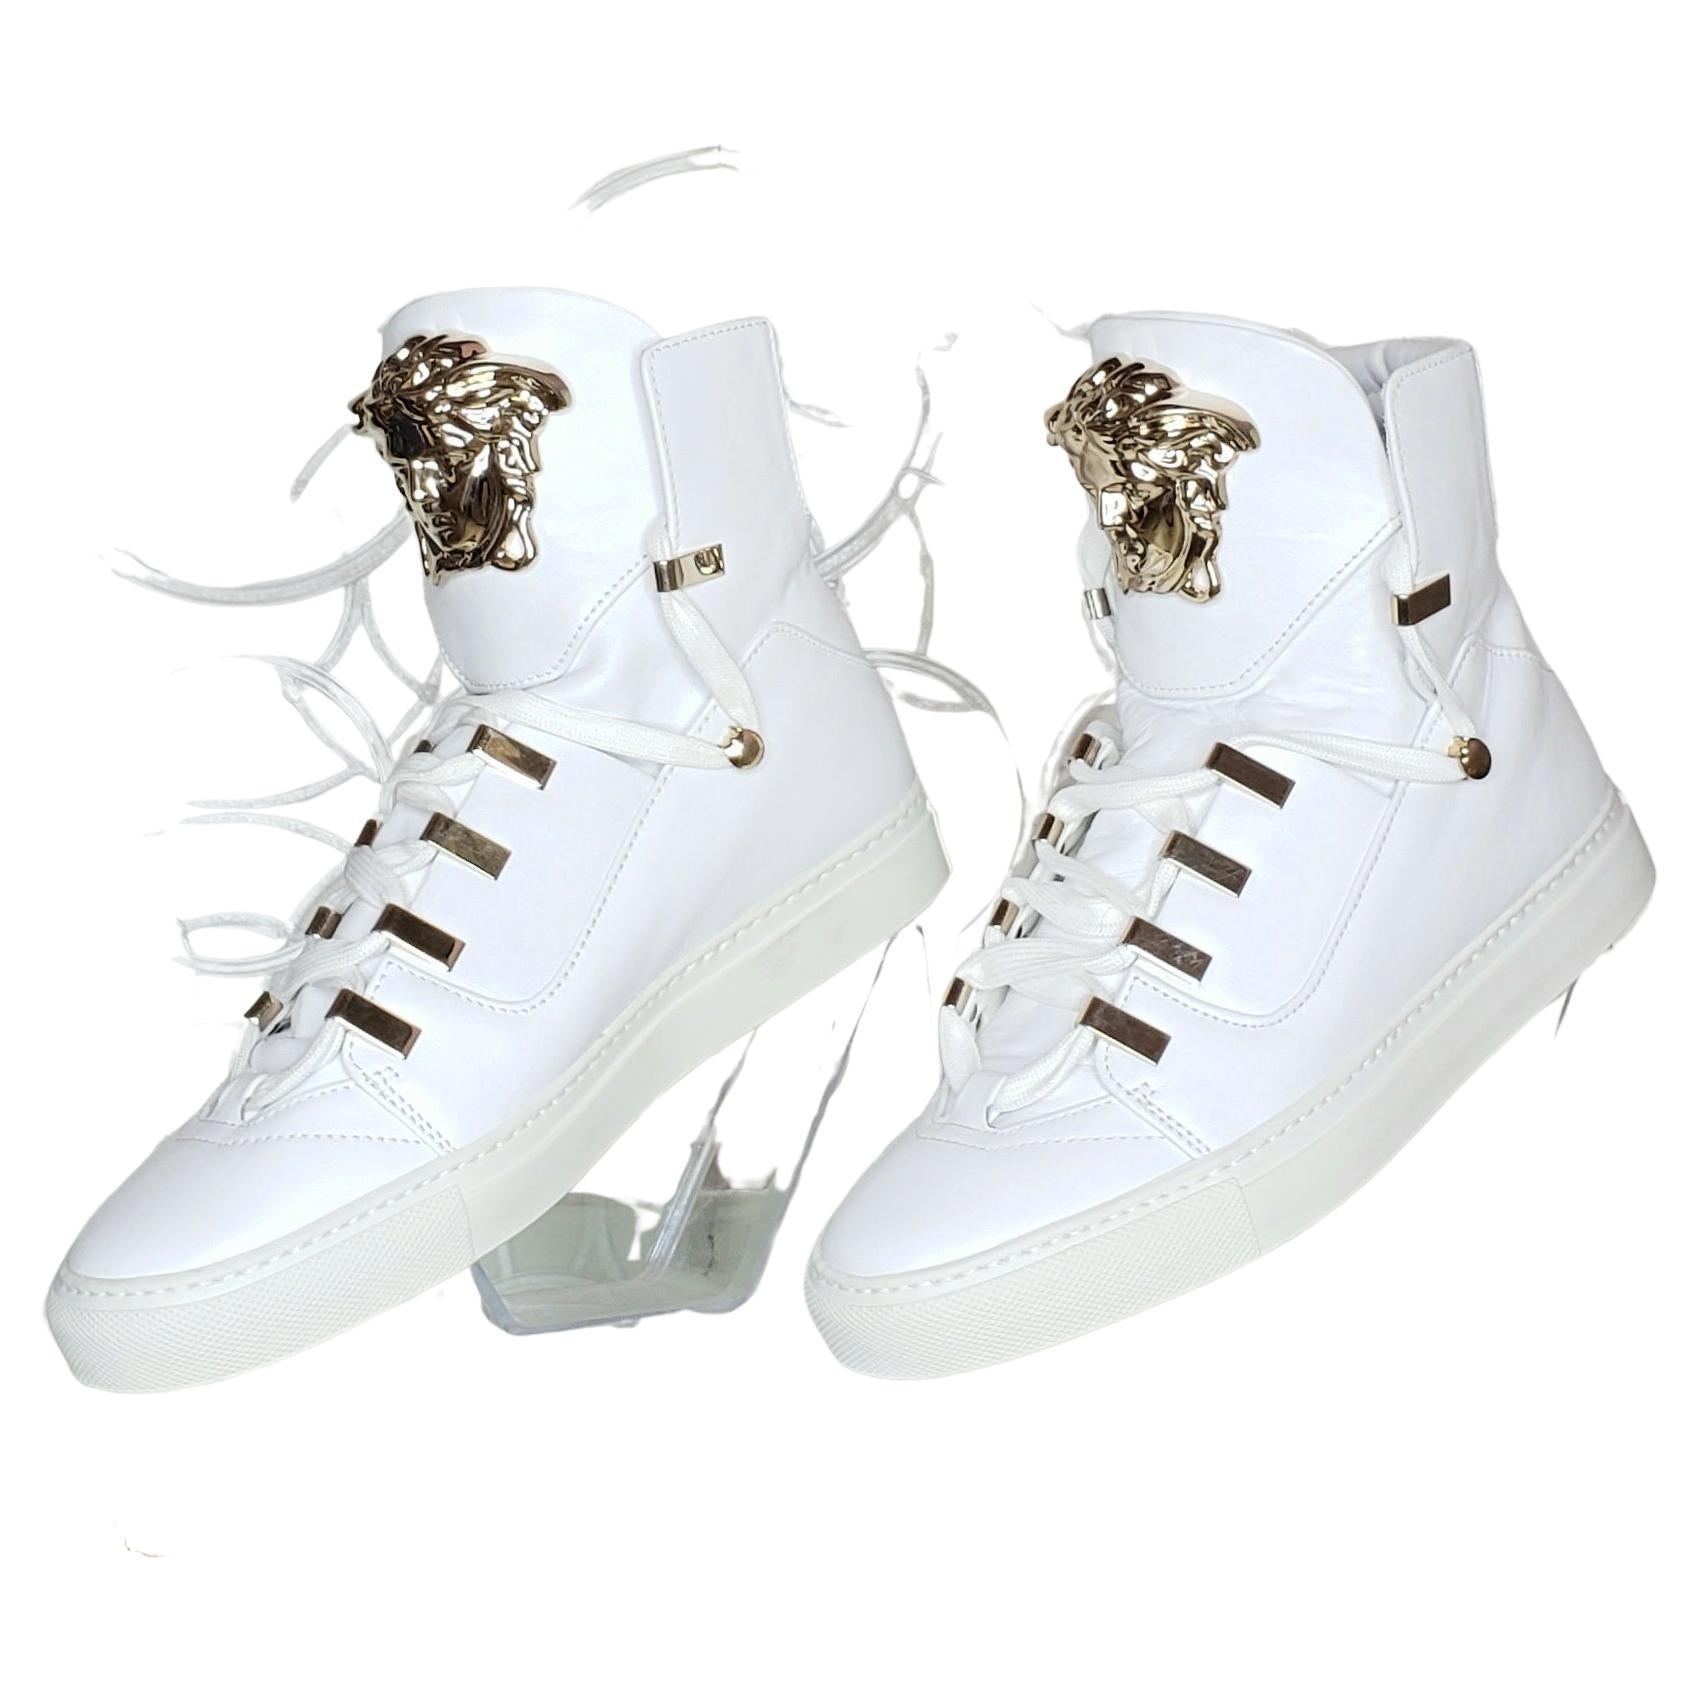 NEW VERSACE WHITE LEATHER SNEAKERS with 3D GOLD MEDUSA Sz 38 - 8 For Sale